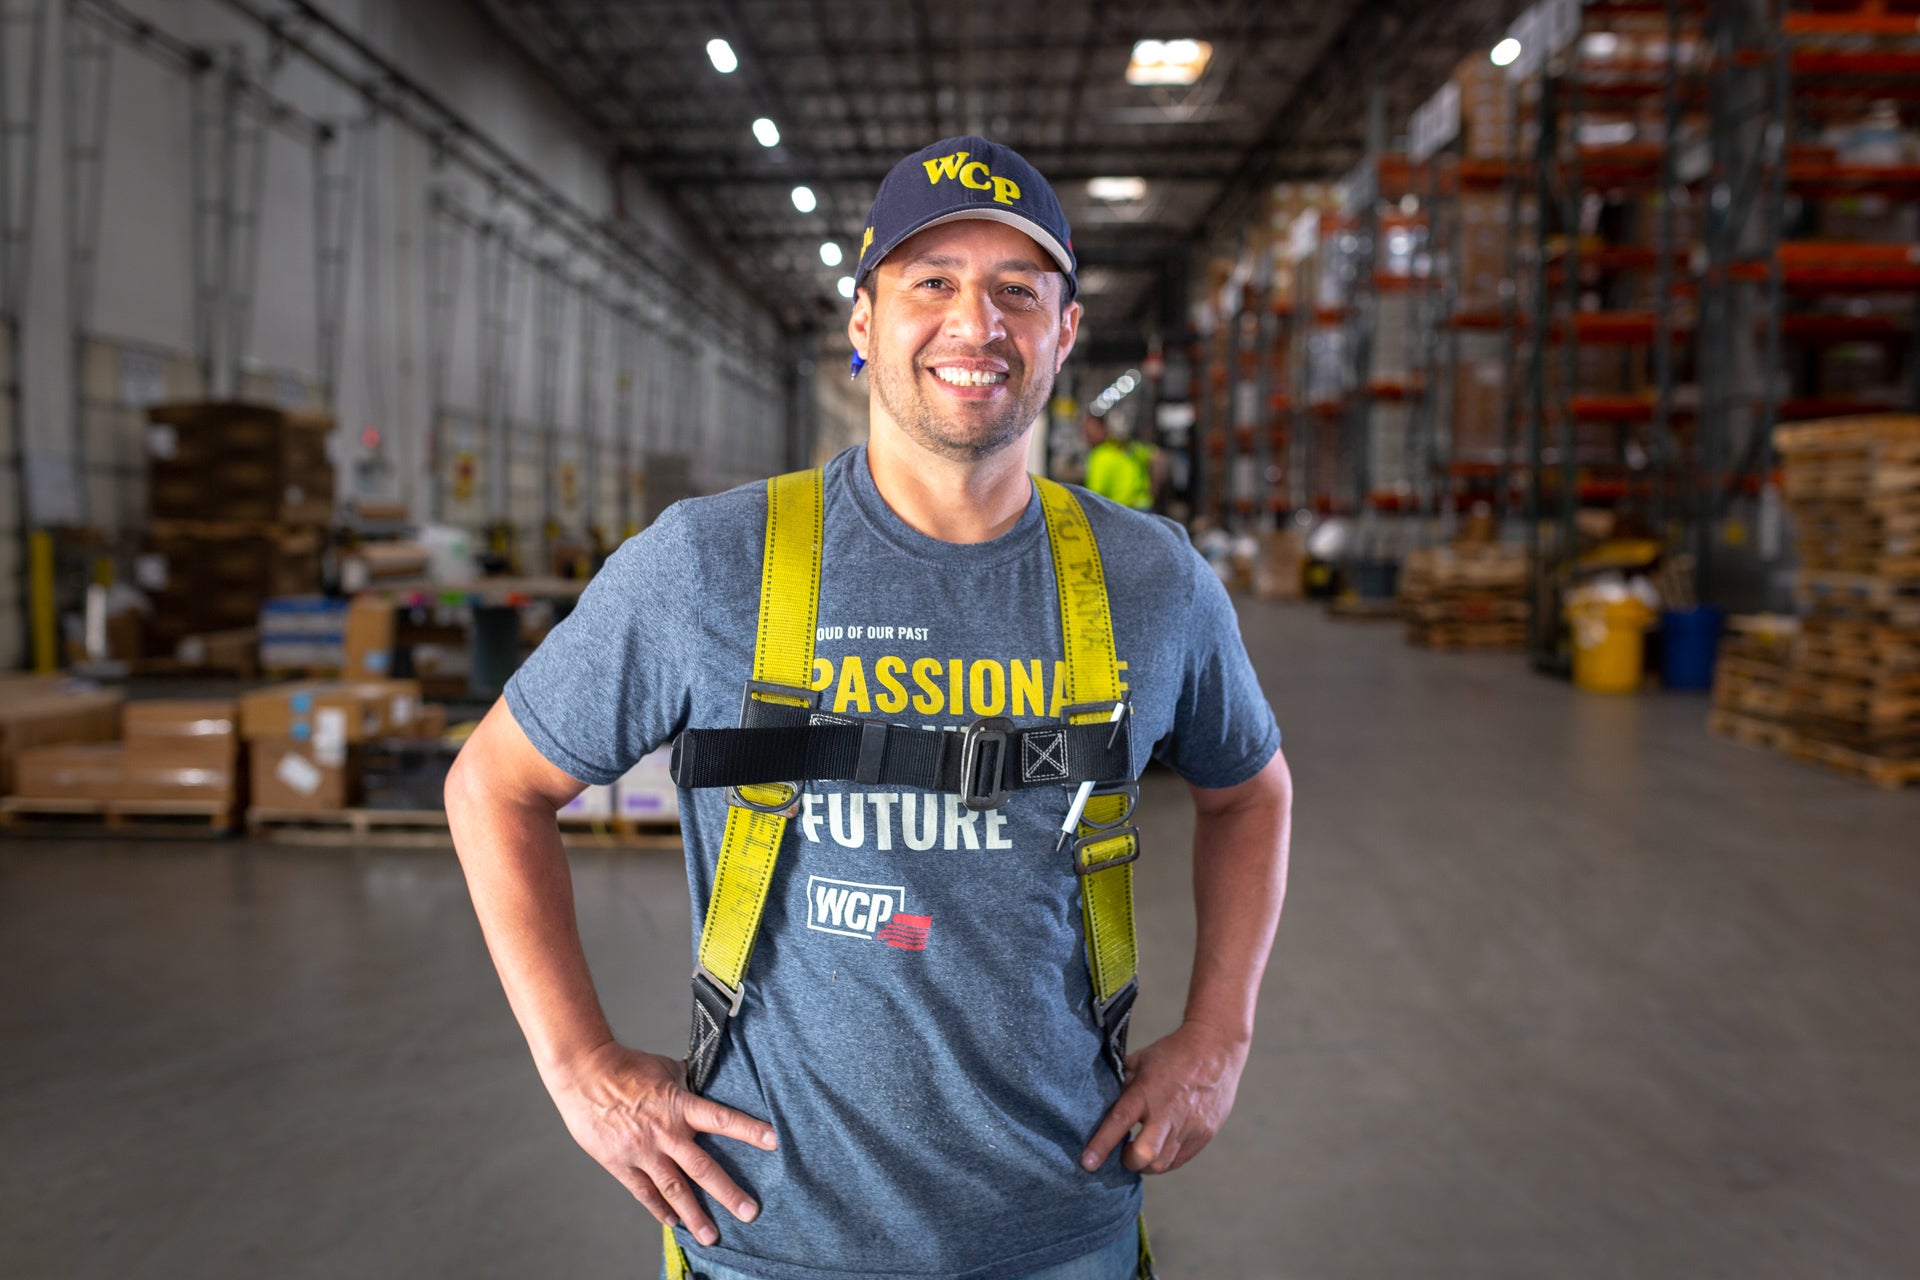 Miguel Valle - Swing Shift Supervisor - WCP Solutions Employee Spotlight